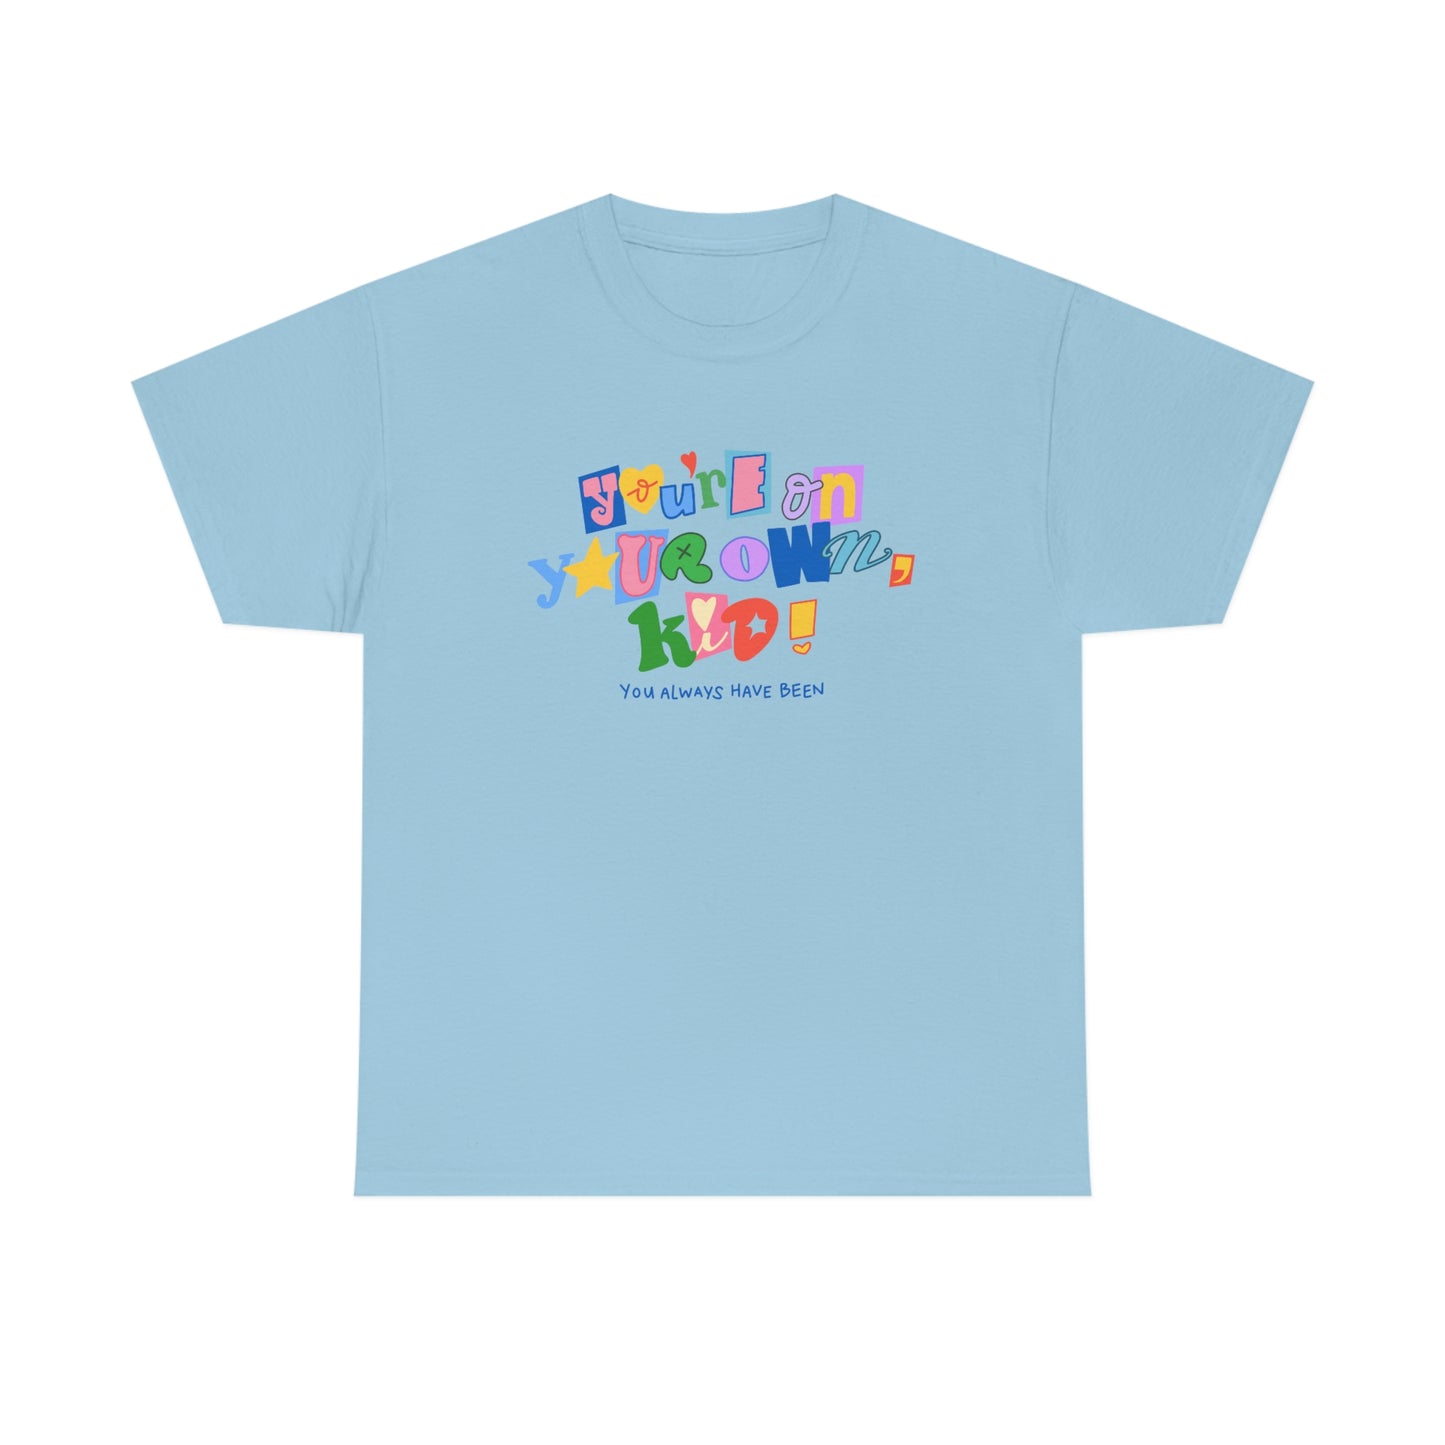 You\'re On Your Own Kid regular tee – at seven studio | T-Shirts